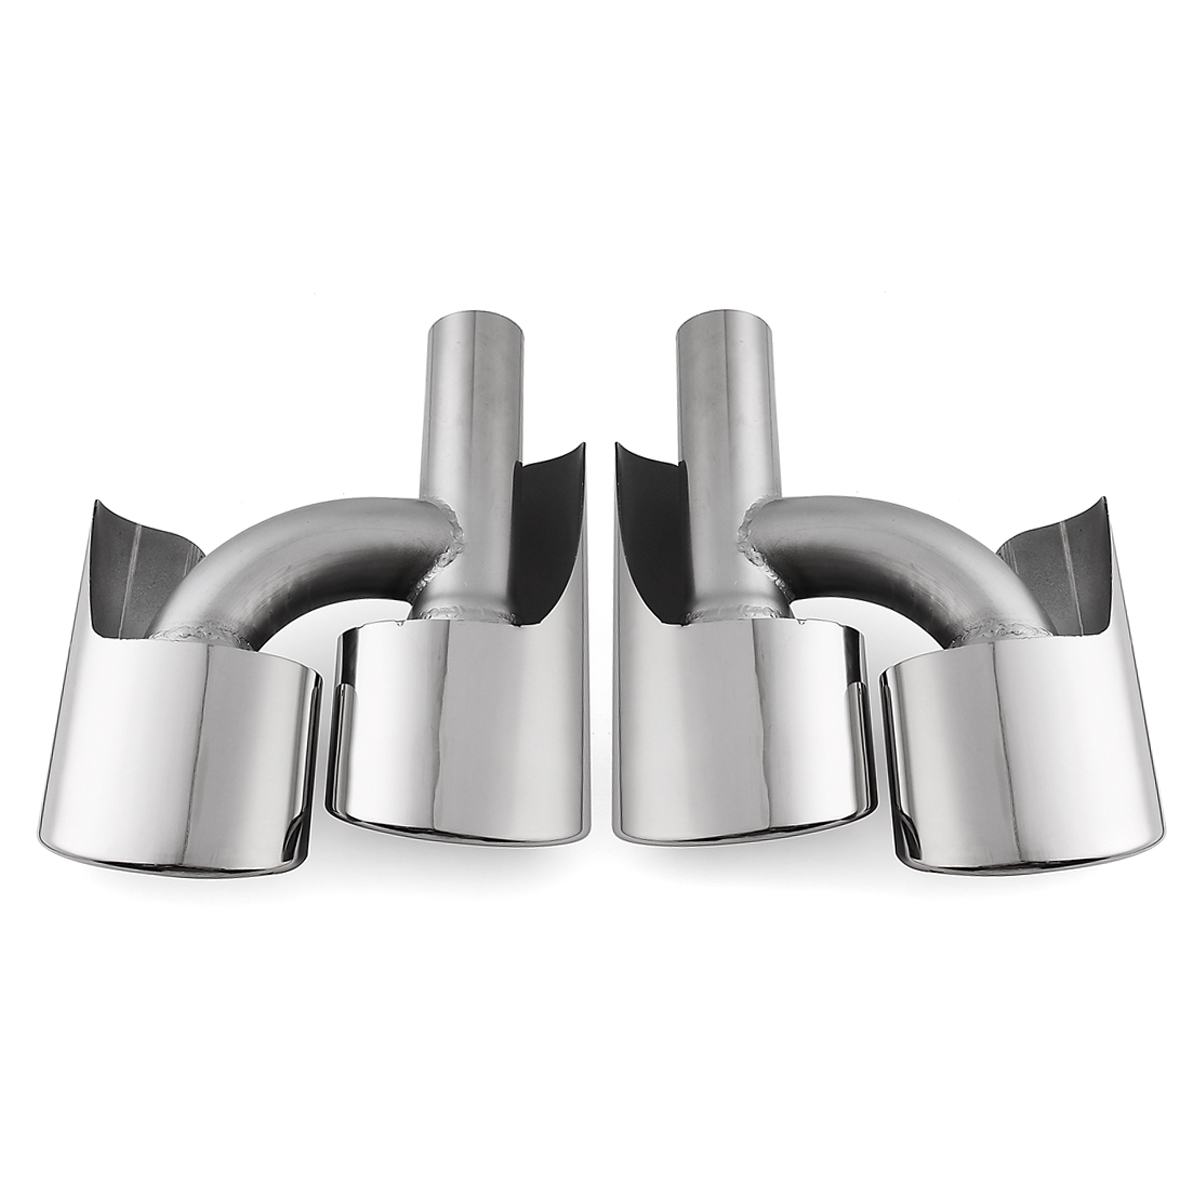 

New Exhaust Muffler Pipe Tips for MERCEDES BENZ C-Classs W204 C300 C63 AMG